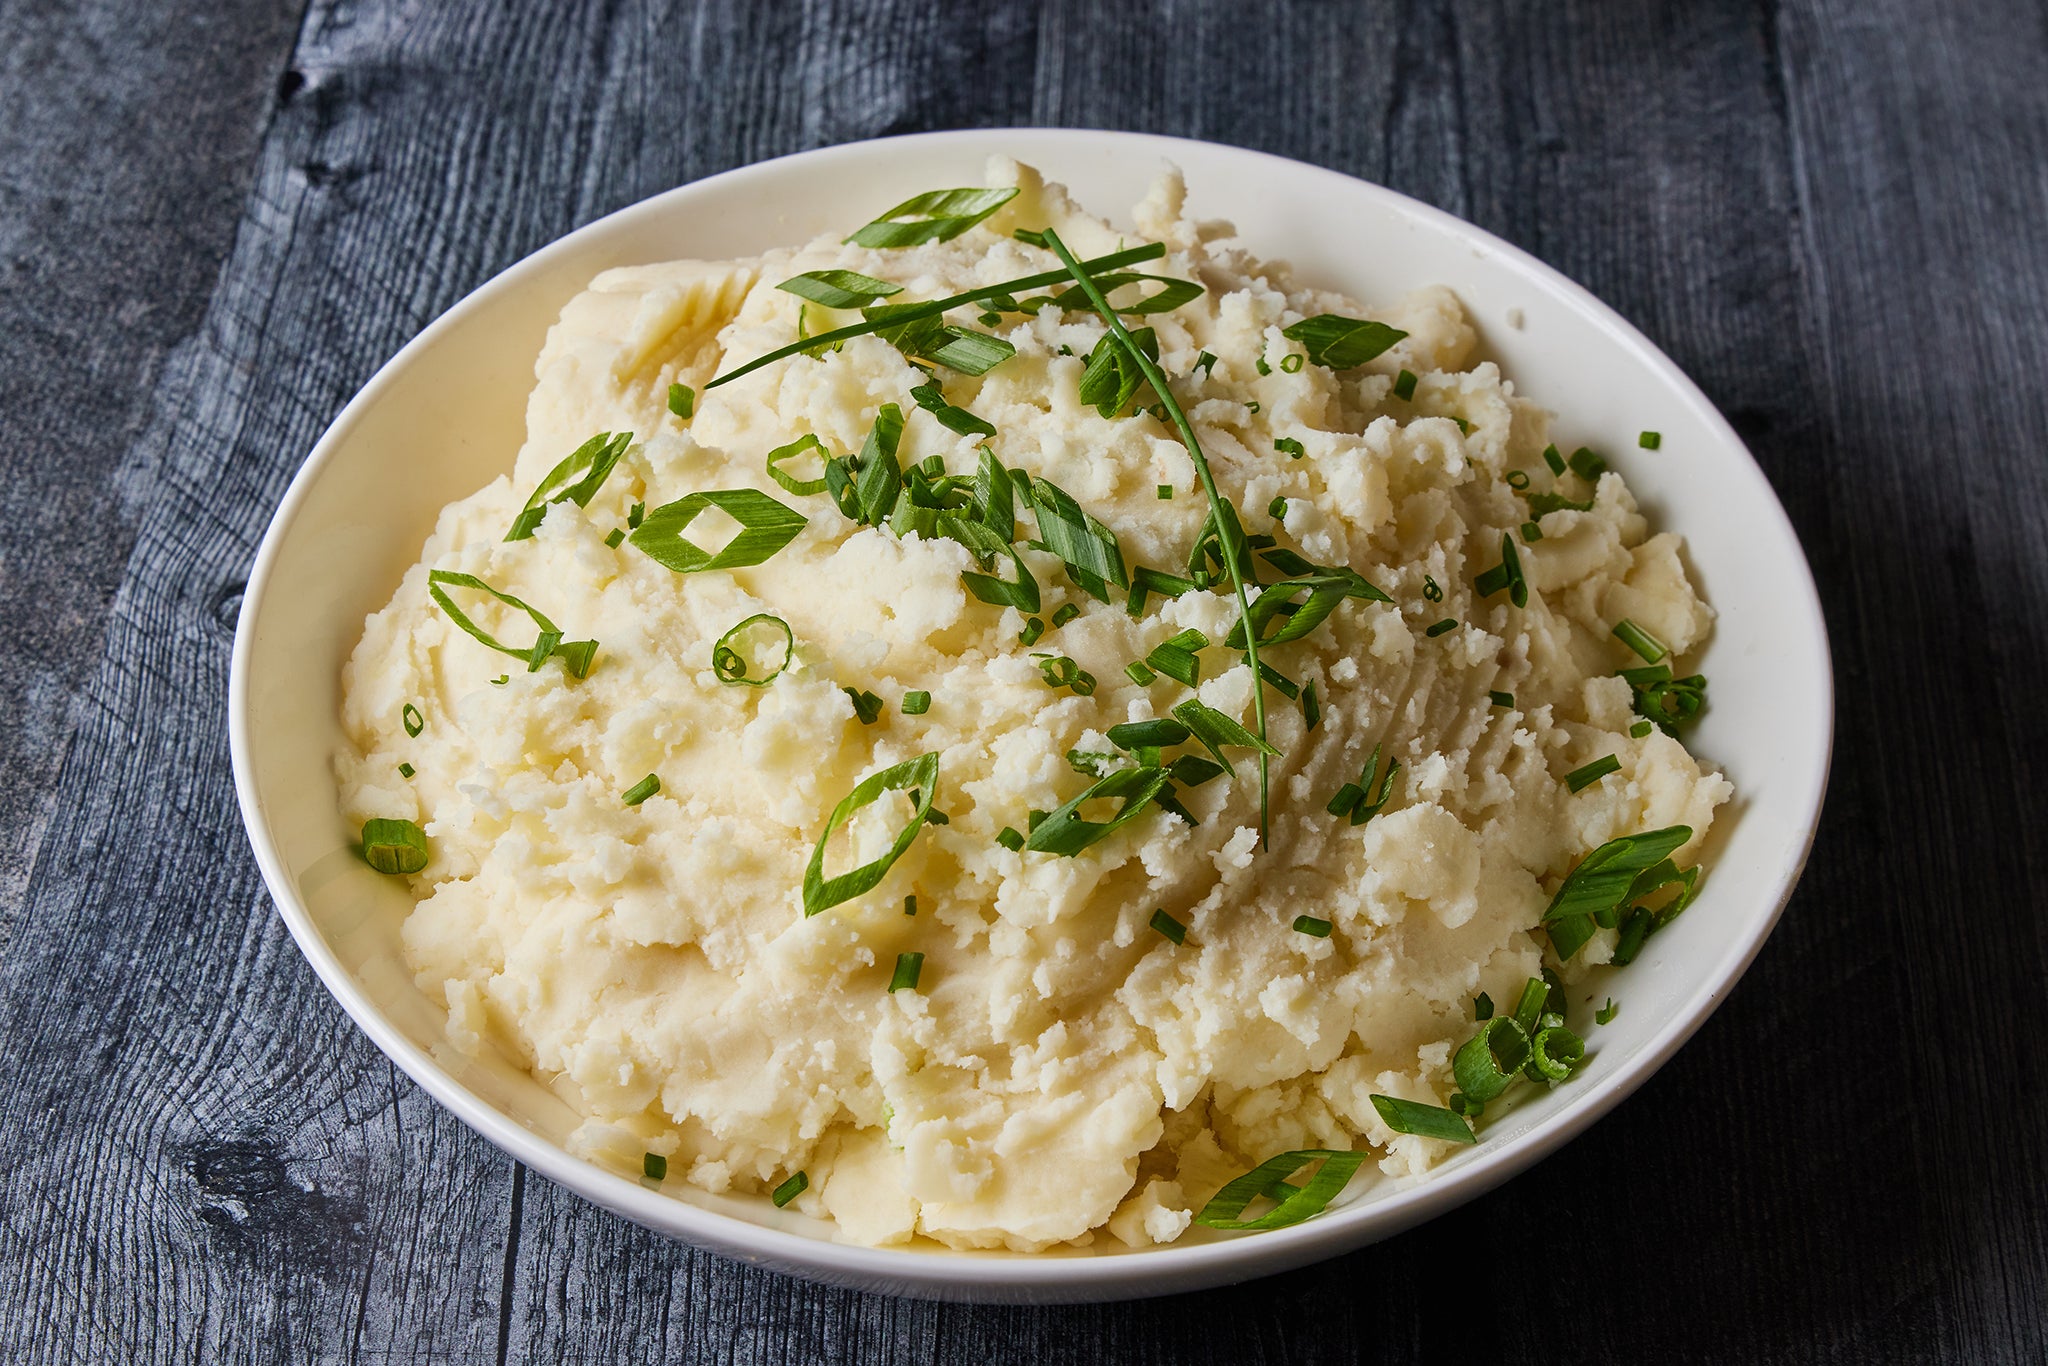 MASHED POTATOES PER PERSON